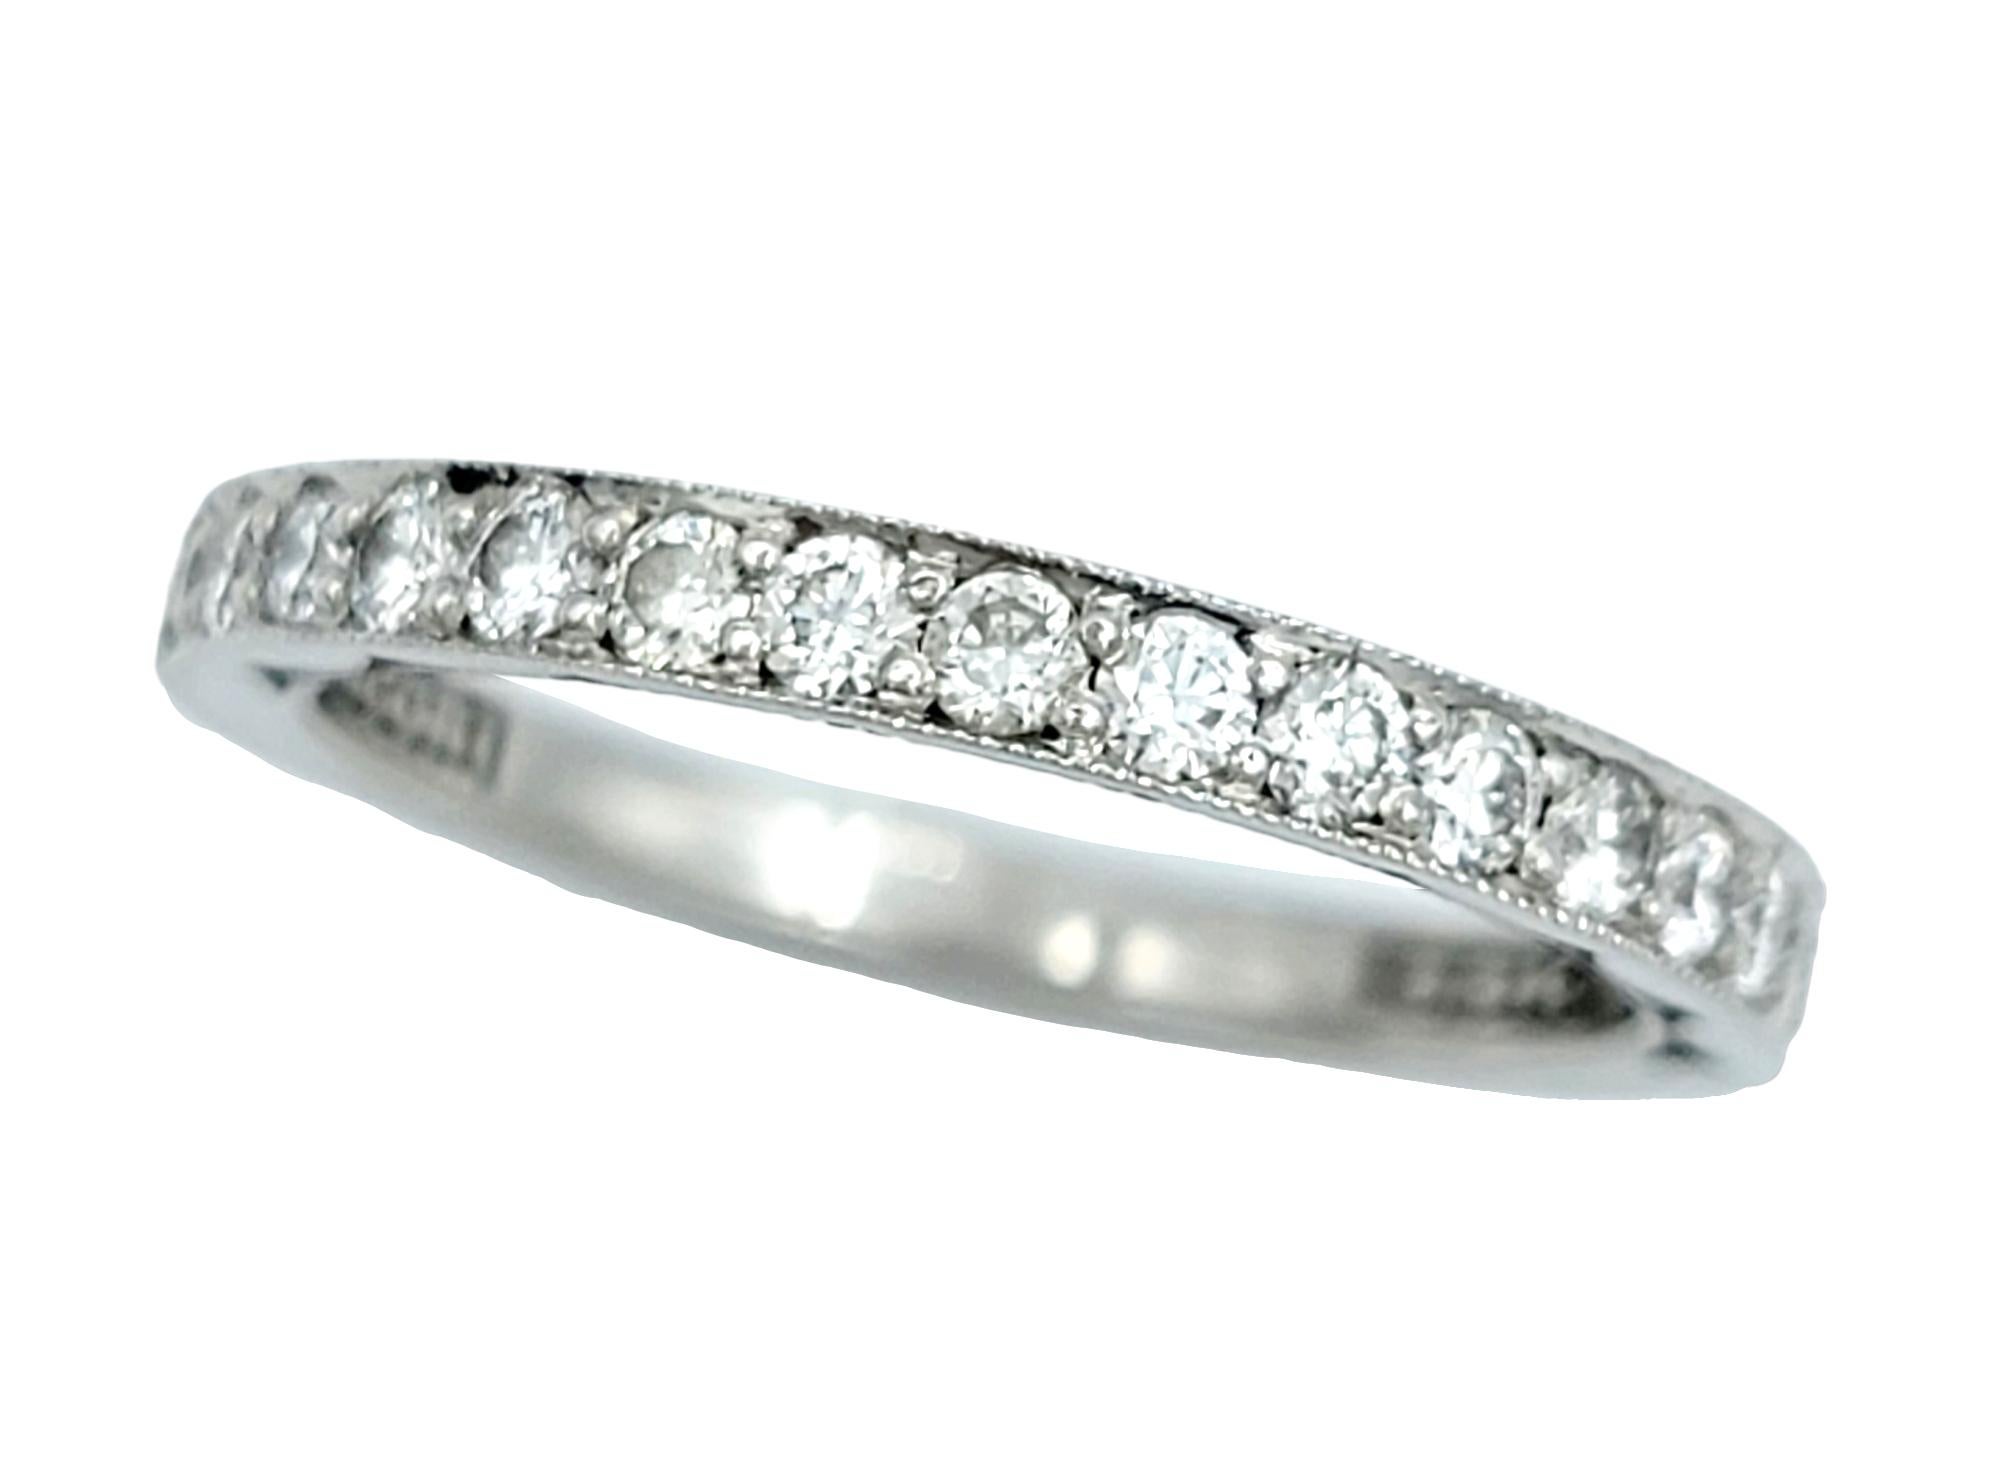 Ring Size: 4

The Tacori Sculpted Crescent band ring is a delicate and elegant piece, crafted in radiant 18-karat white gold. Perfectly designed for versatility, this ring serves as a stunning addition to a stack of rings or as an enchanting wedding